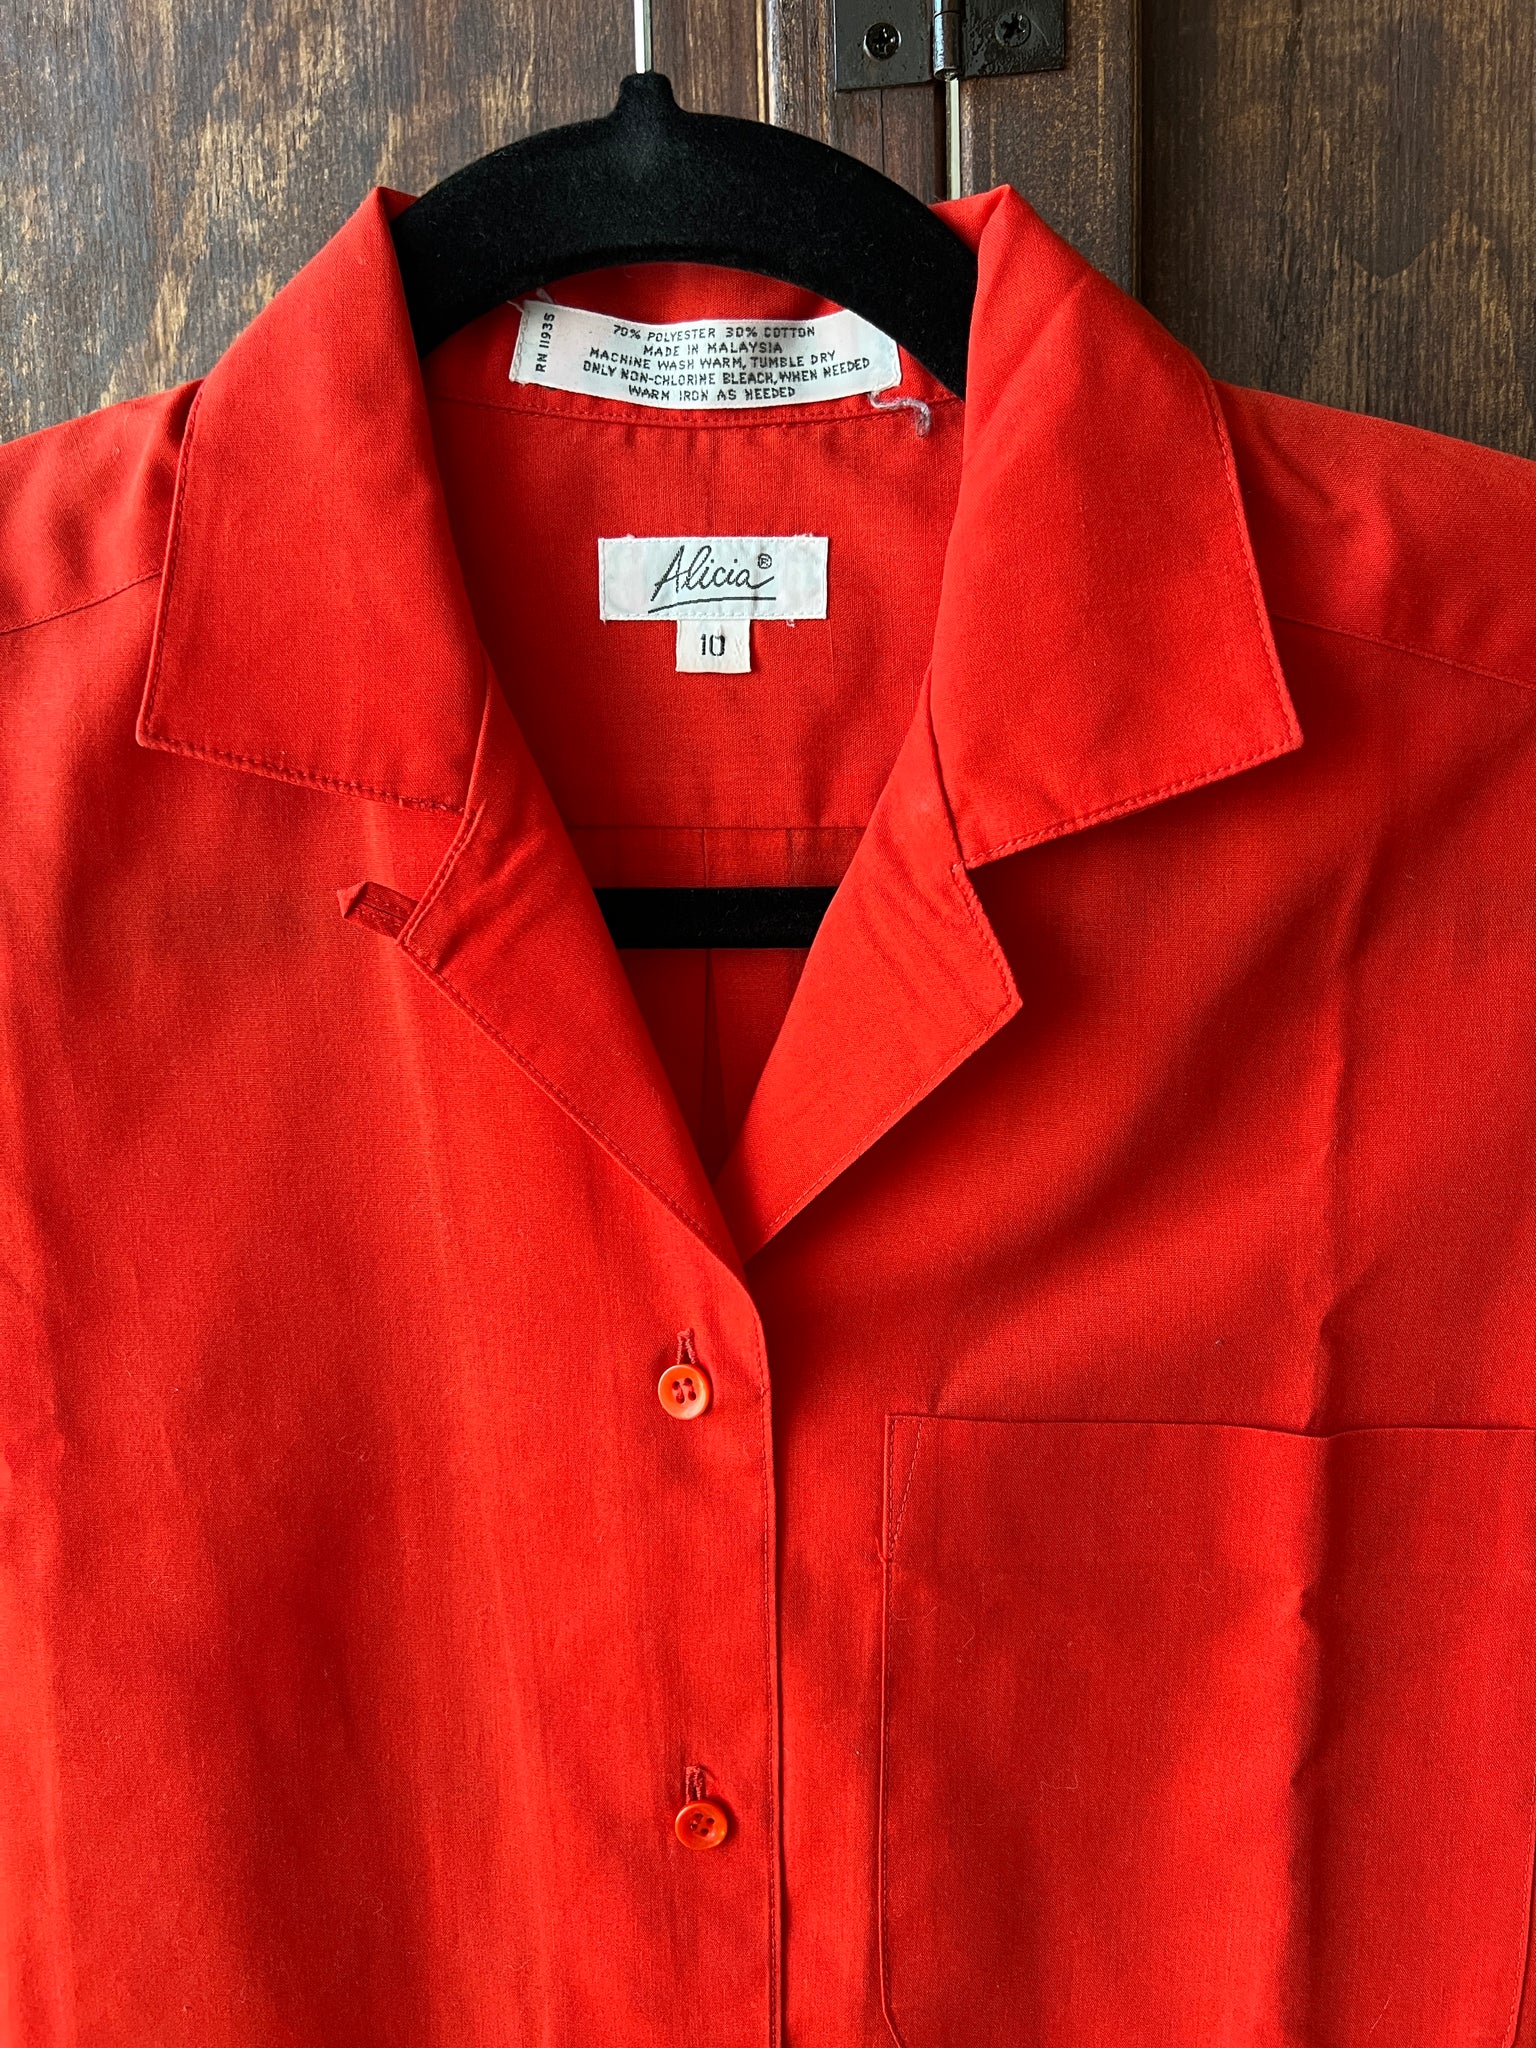 1980s TOP- Alicia red cotton/poly camp s/s